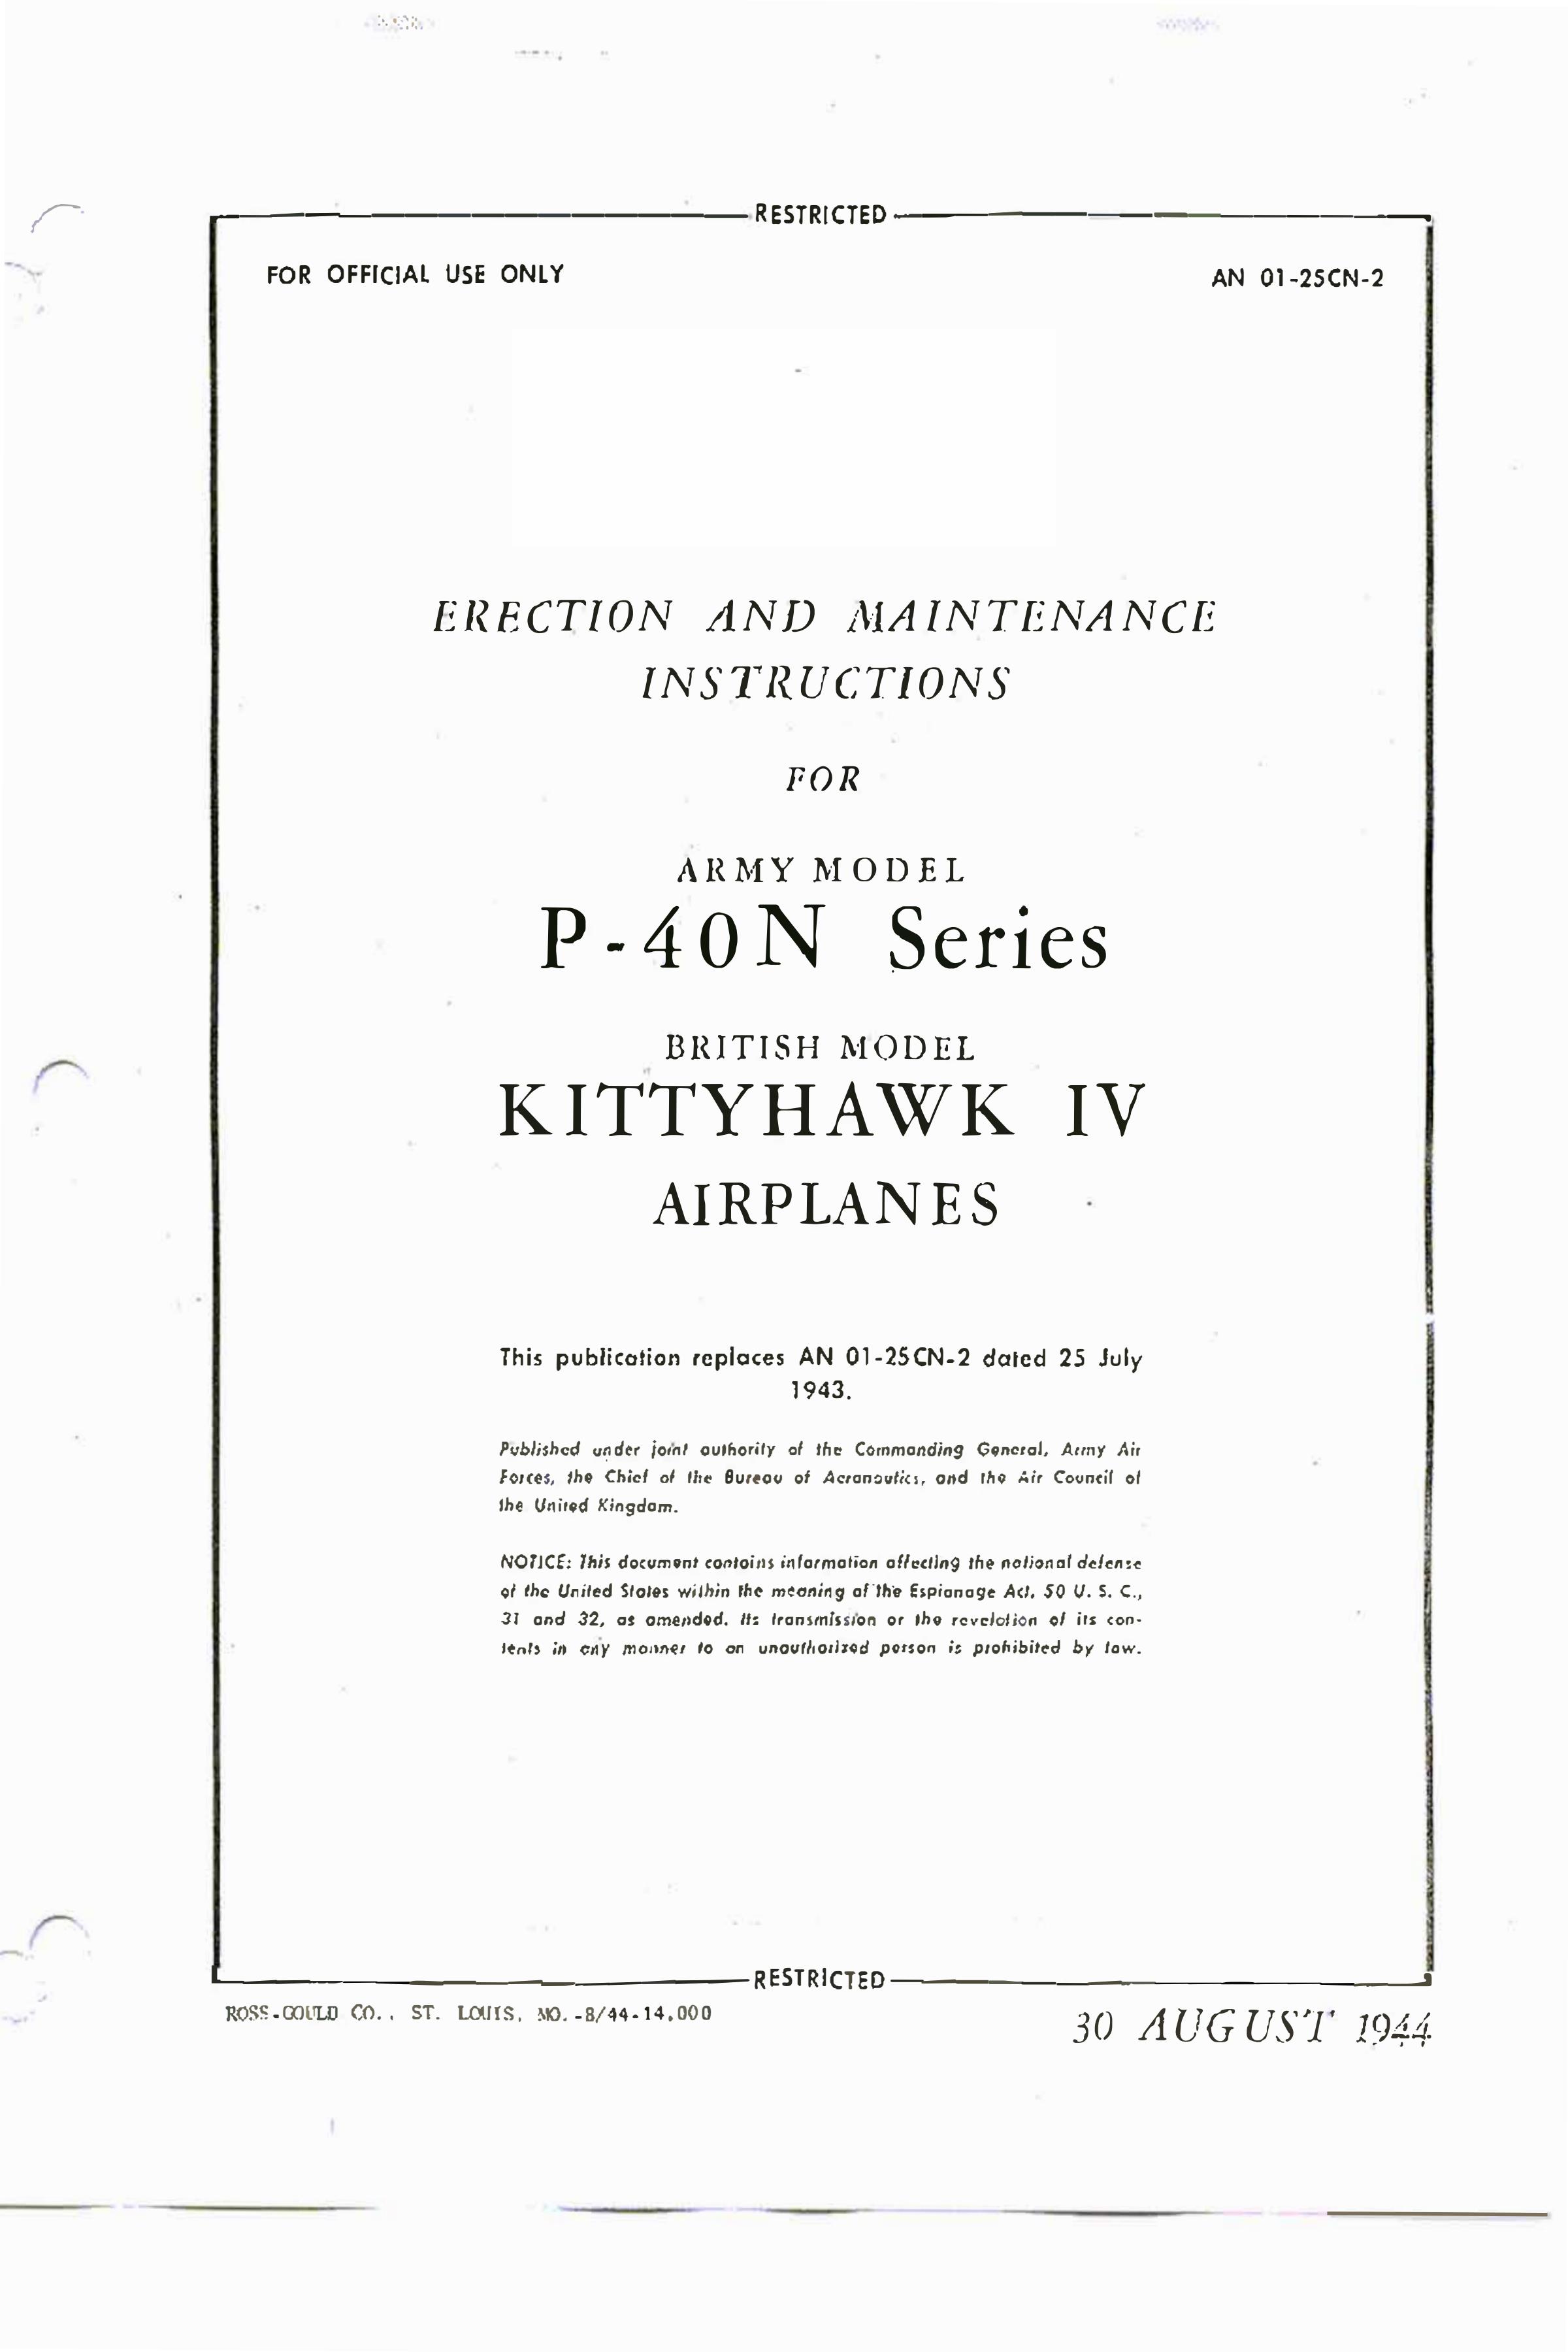 Sample page 1 from AirCorps Library document: Erection & Maintenance - P-40N